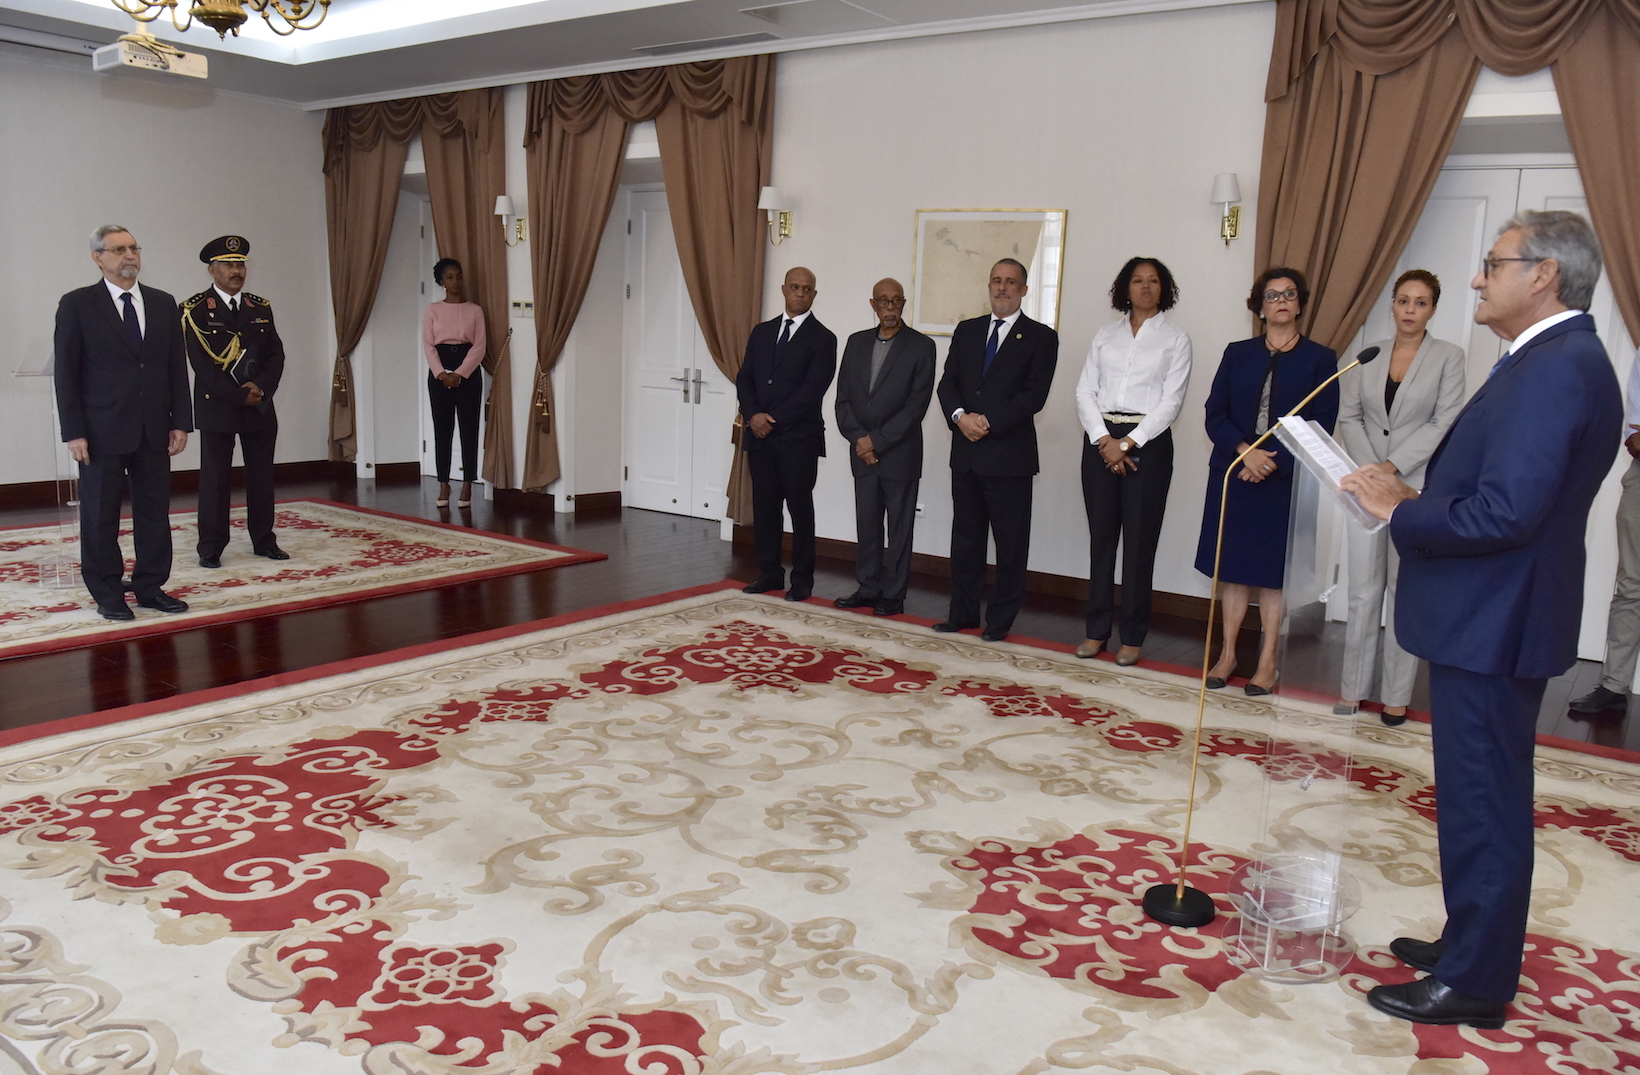 The new Ambassador of the Order of Malta to Cabo Verde presents his letters of credence